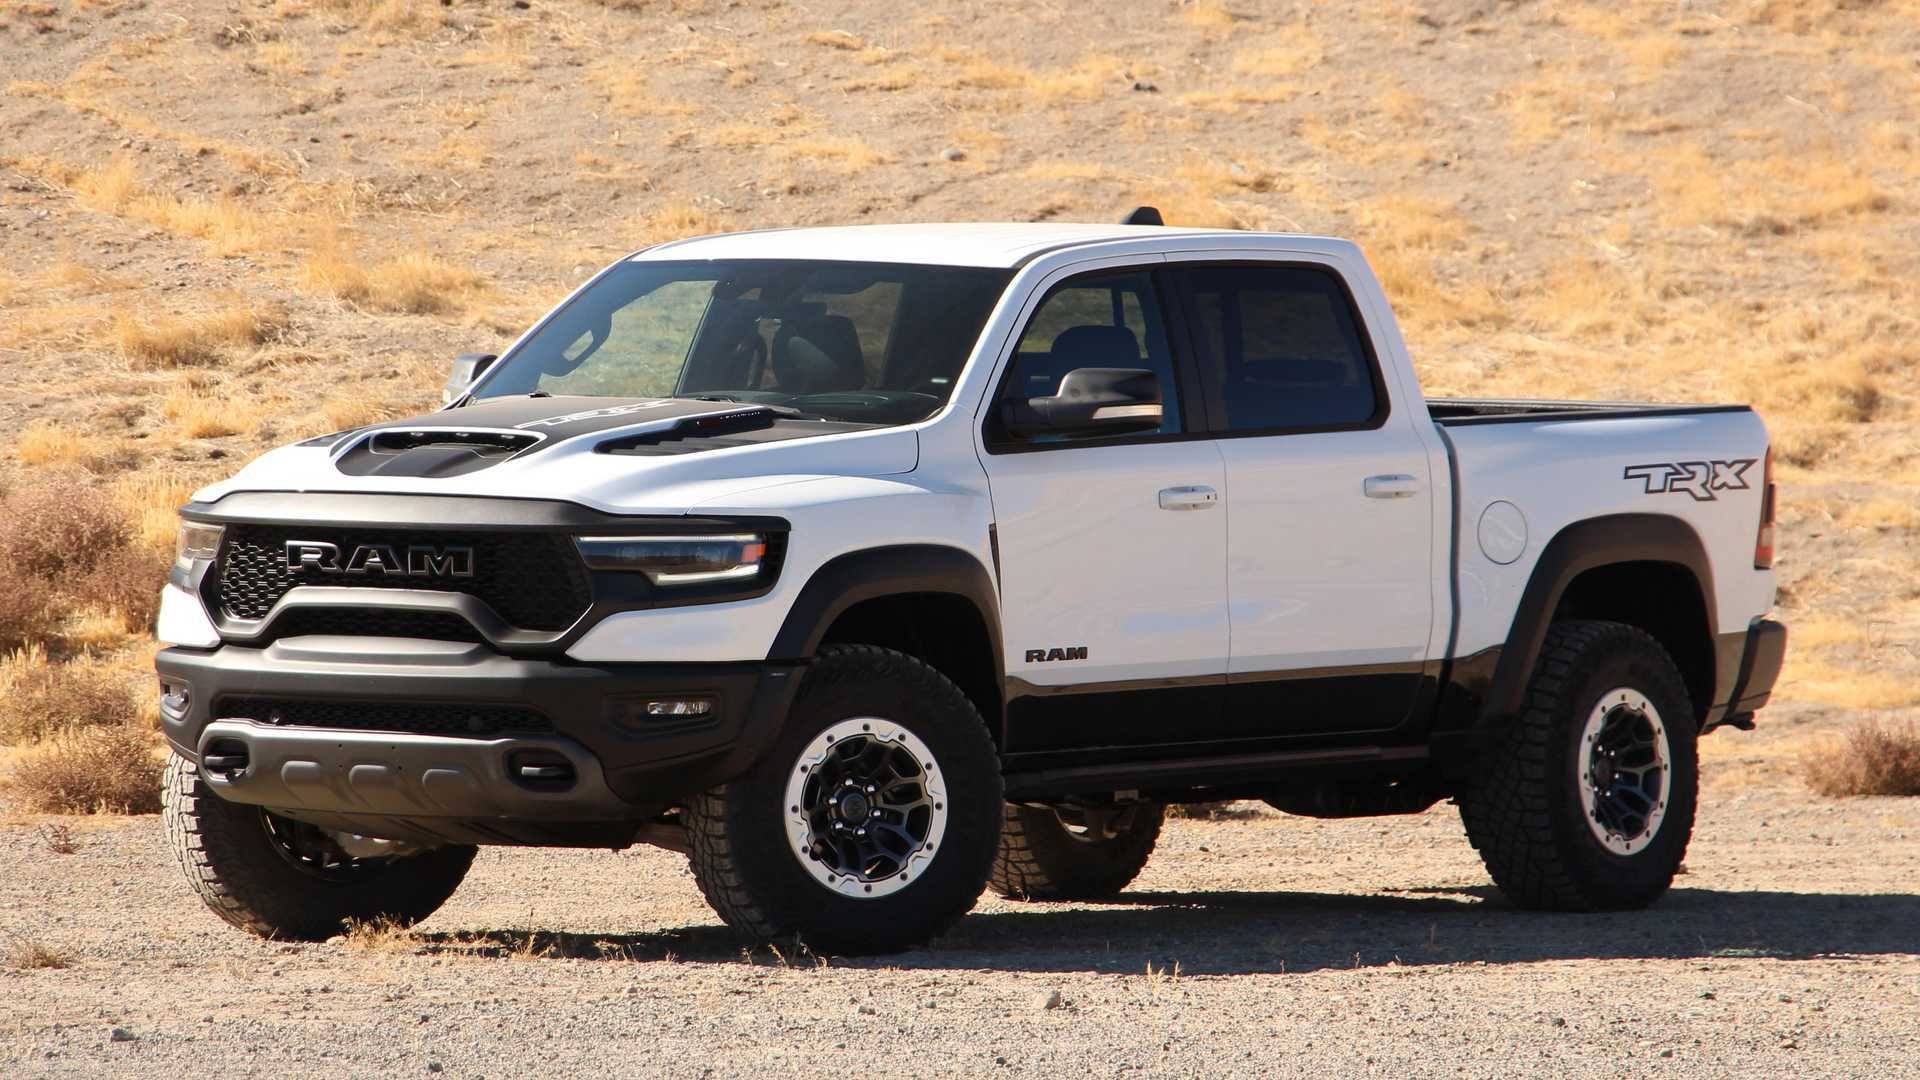 2021 Ram TRX Gets A Measly 12 MPG Combined, 10 City, And 14 Highway